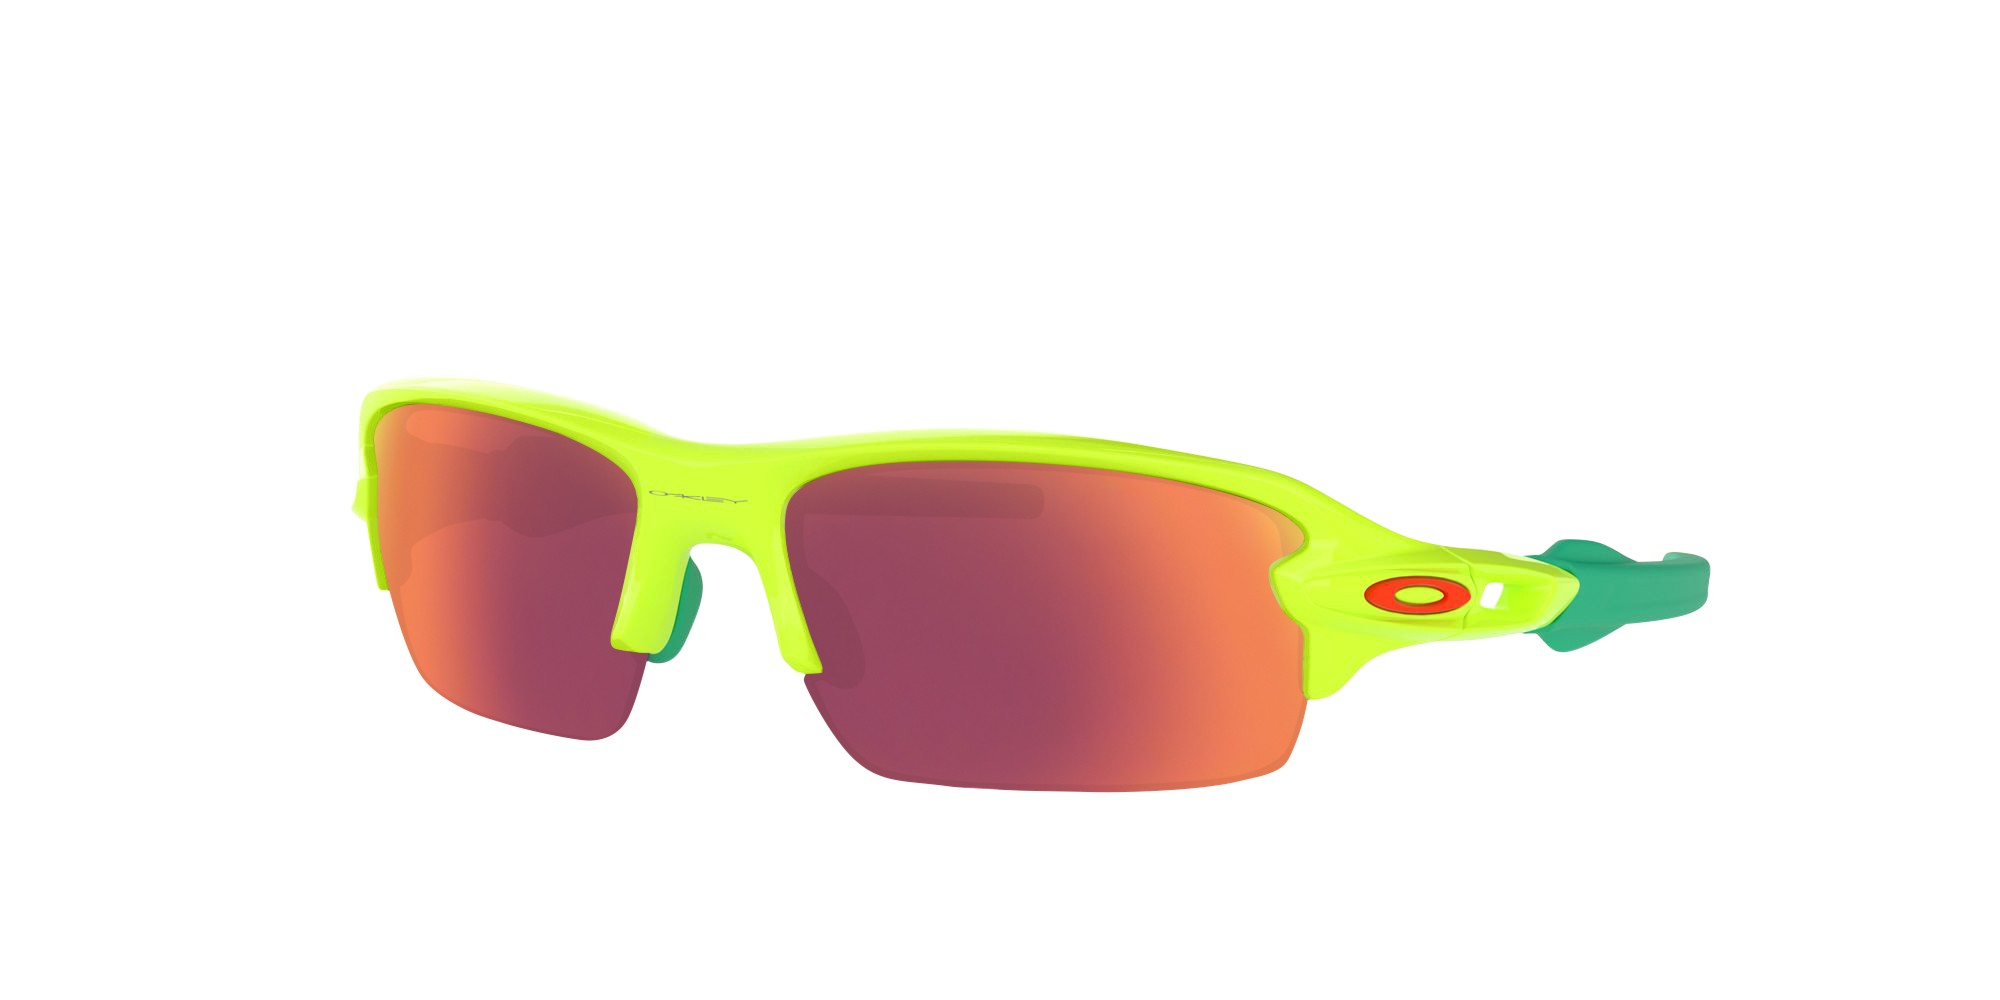 Oakley Flak® XS (Youth Fit) Replacement Lenses - Prizm Trail